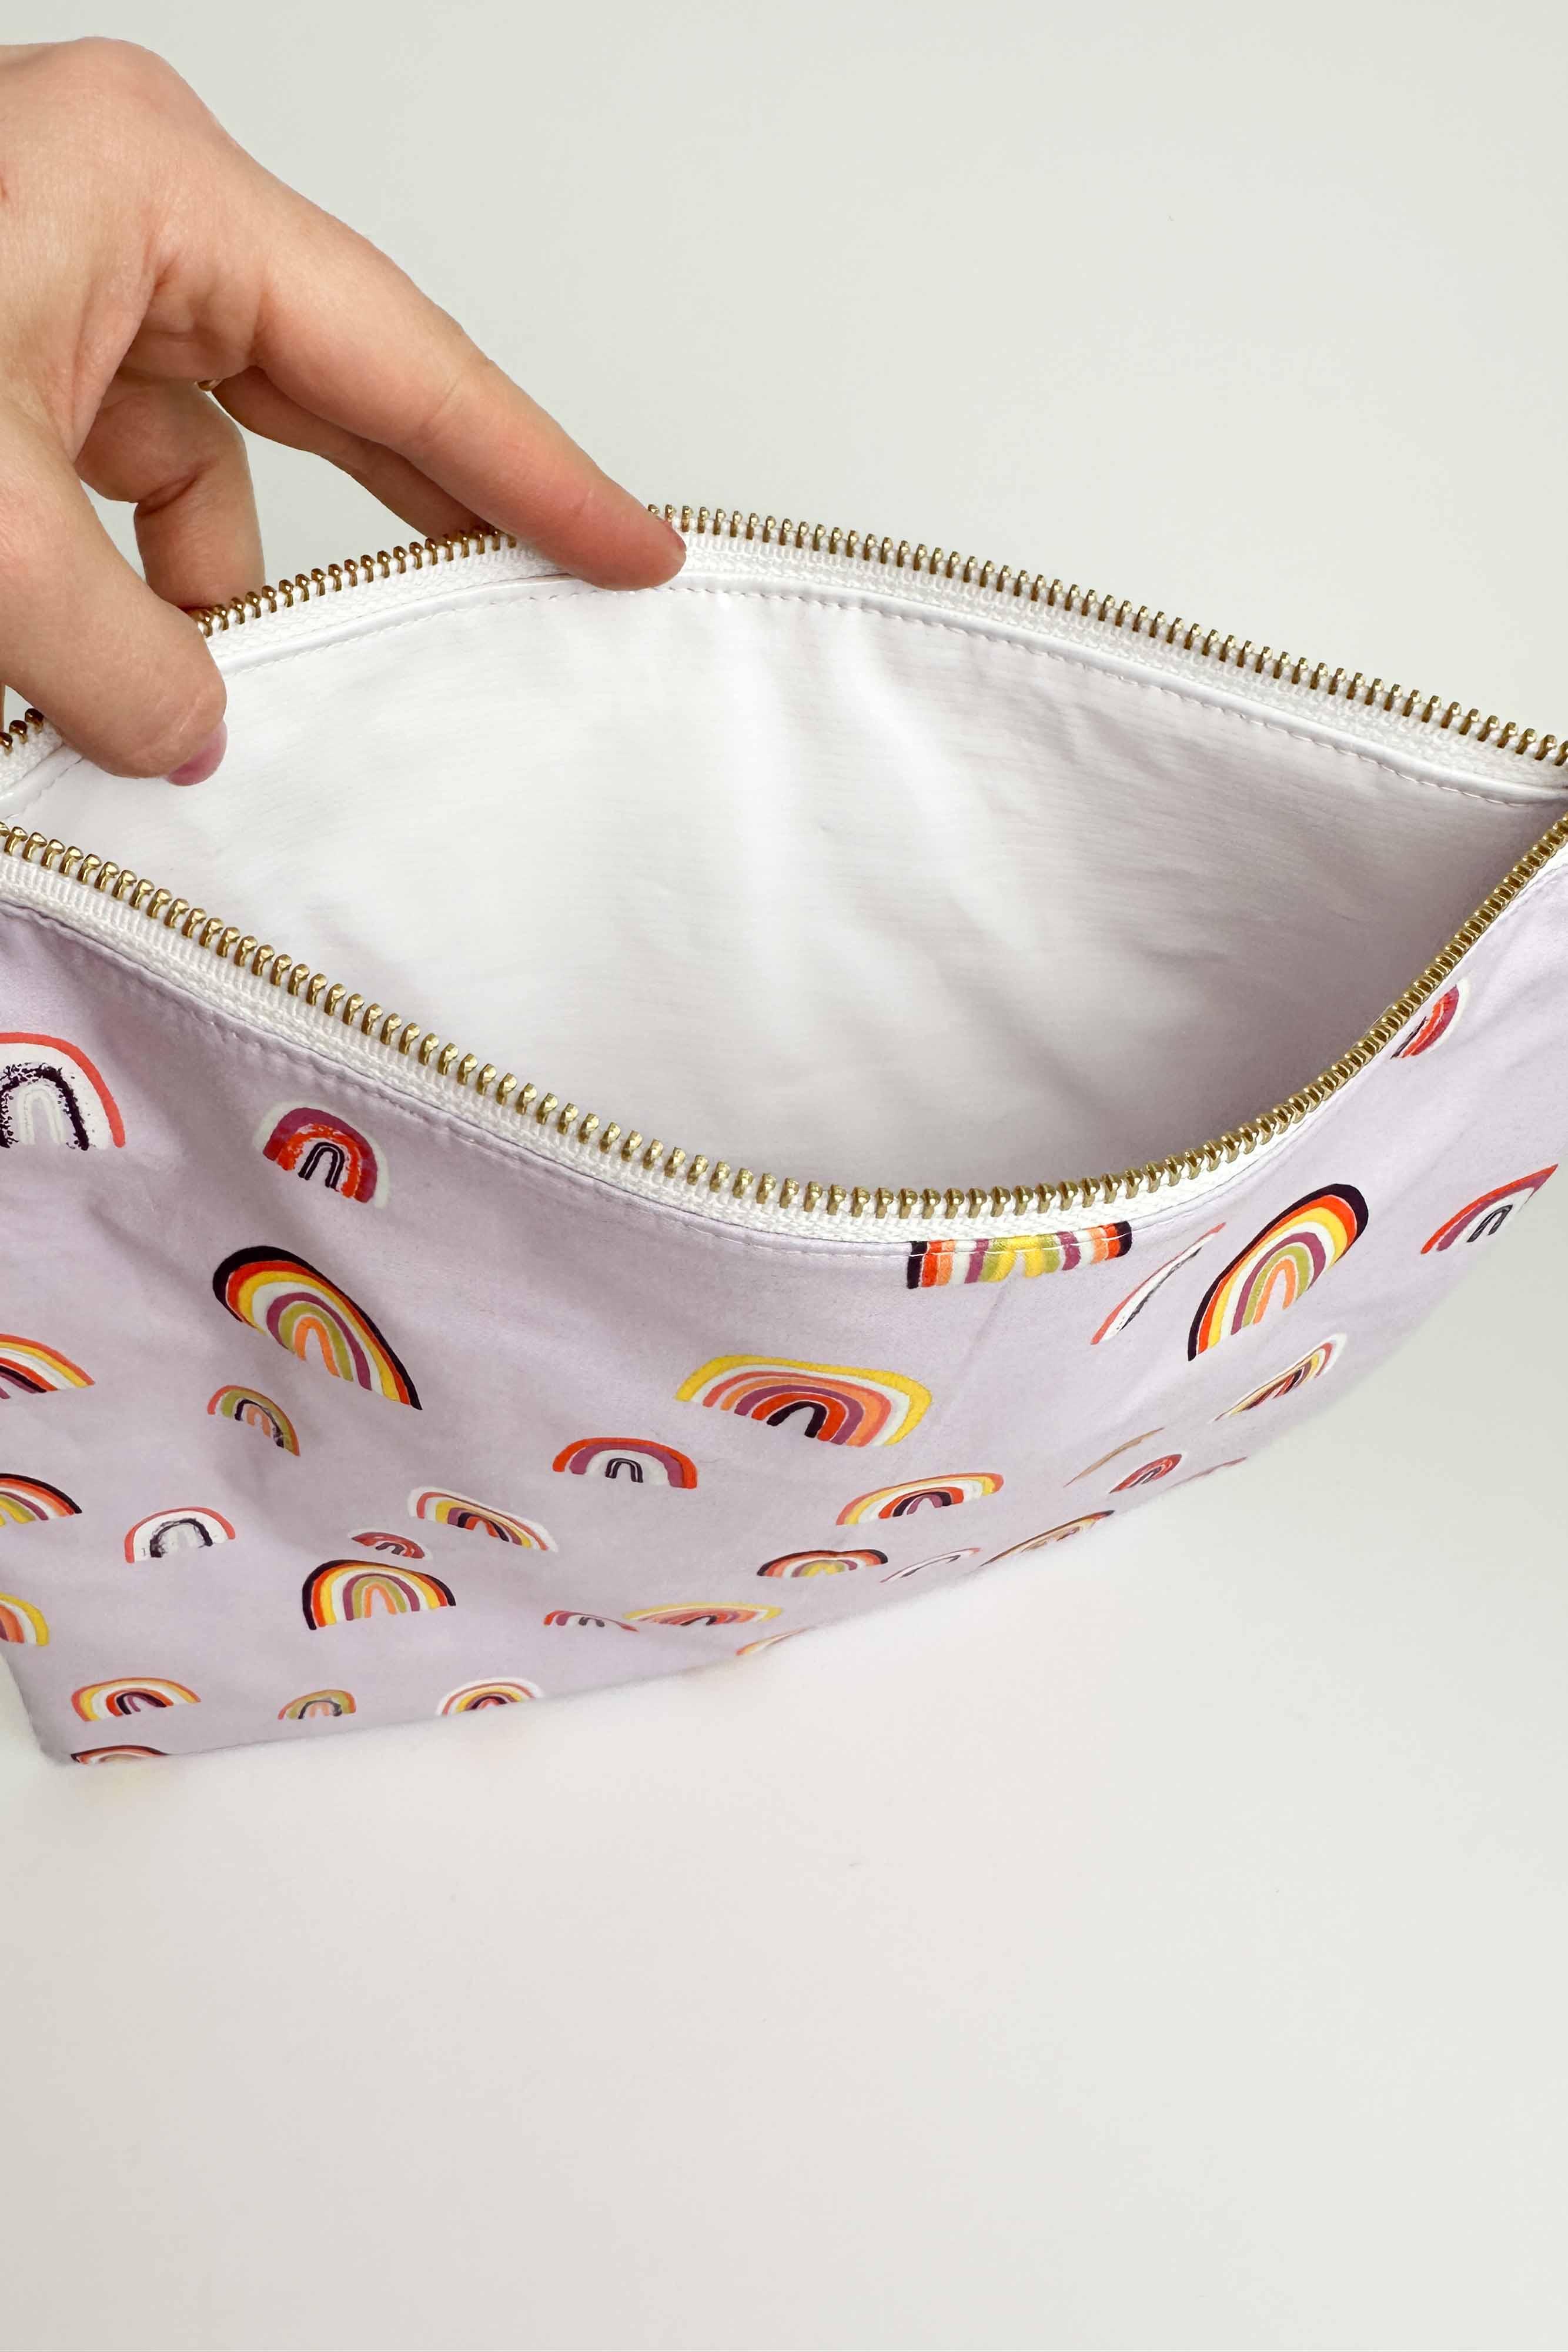 Rainbow Dreams Large Wet Bag READY TO SHIP - Modern Makerie